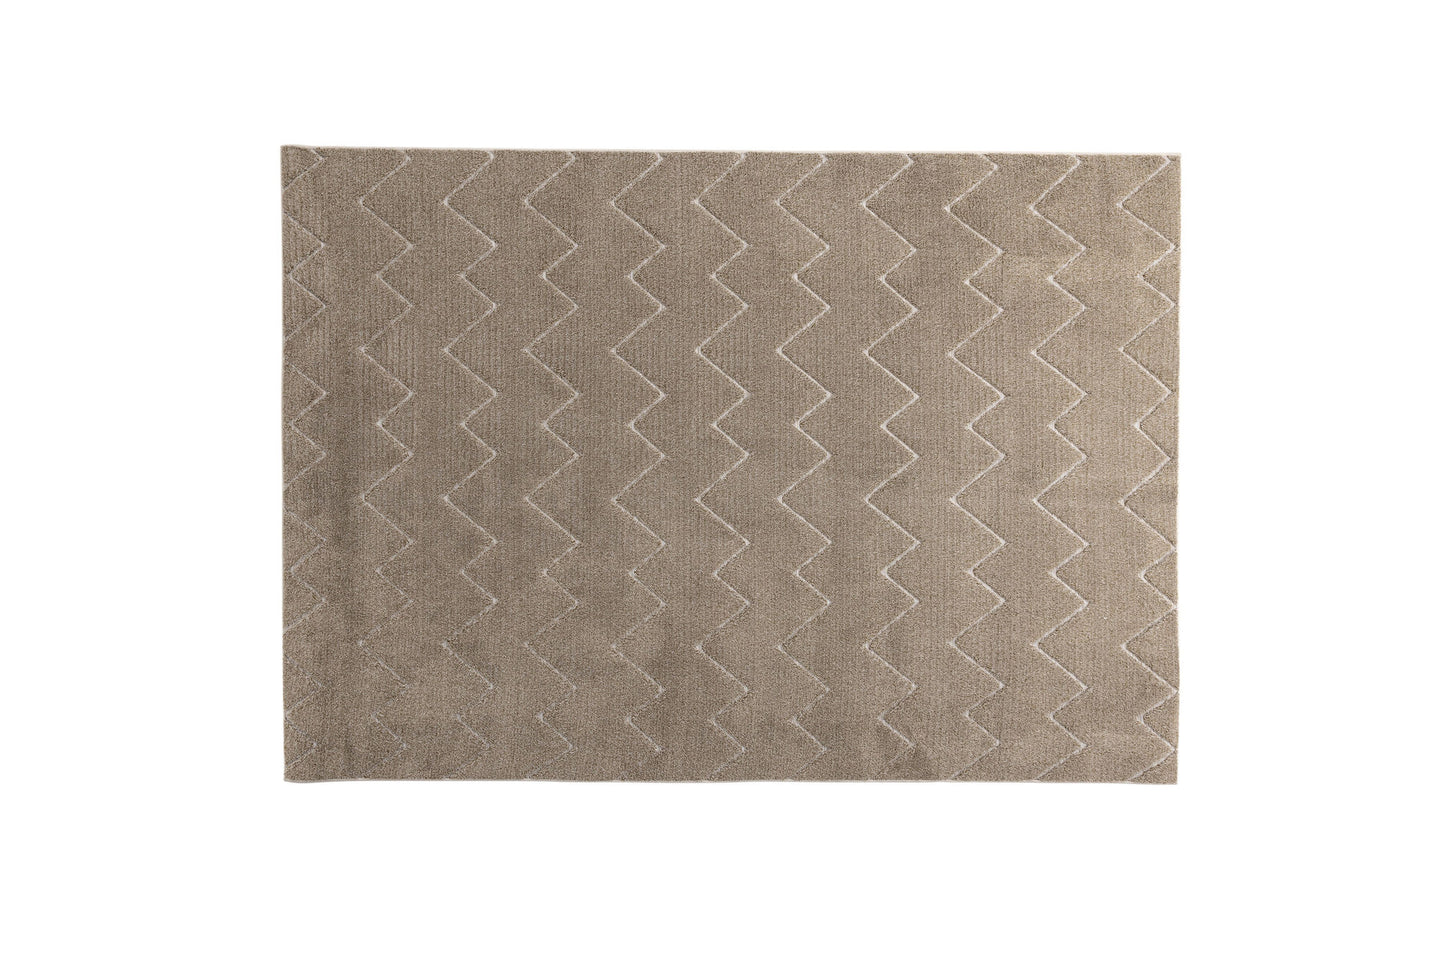 Melle Micropolyester - 230*160- -Rectangular -Ivory Beige